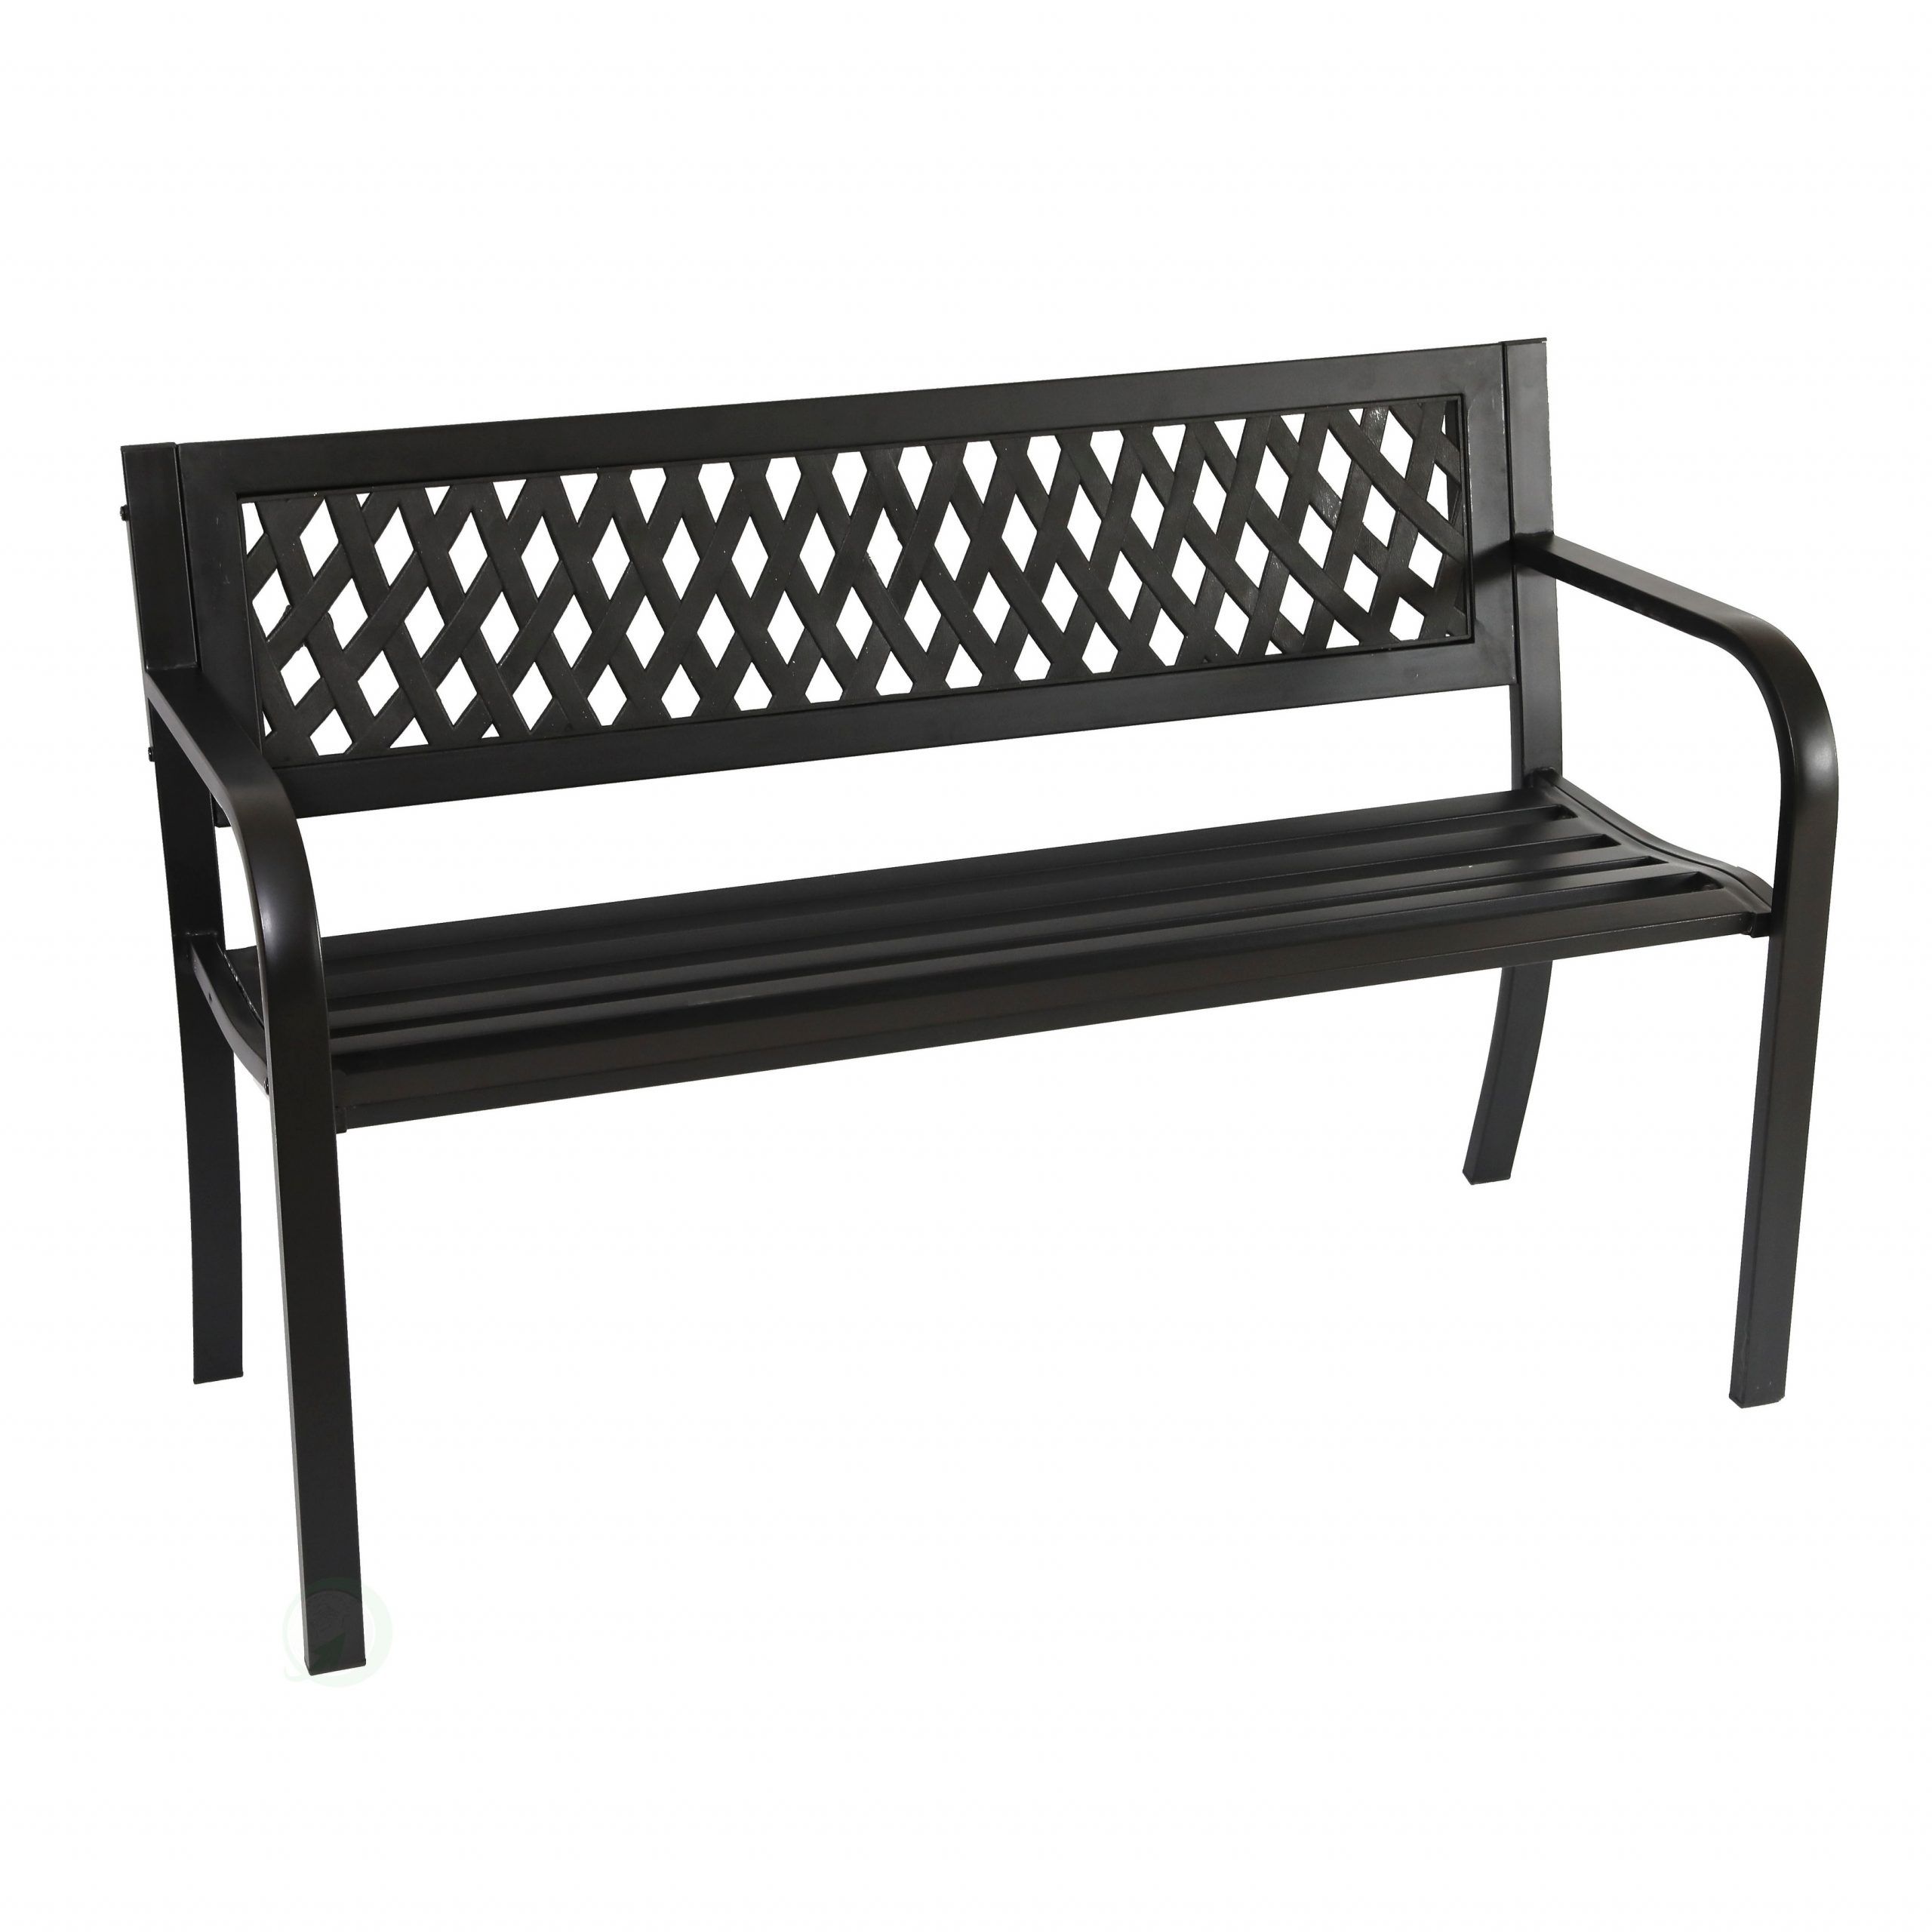 Gardenised Black Patio Garden Park Yard 47" Steel Bench With Plastic Back Within 2020 Celtic Knot Iron Garden Benches (View 29 of 30)